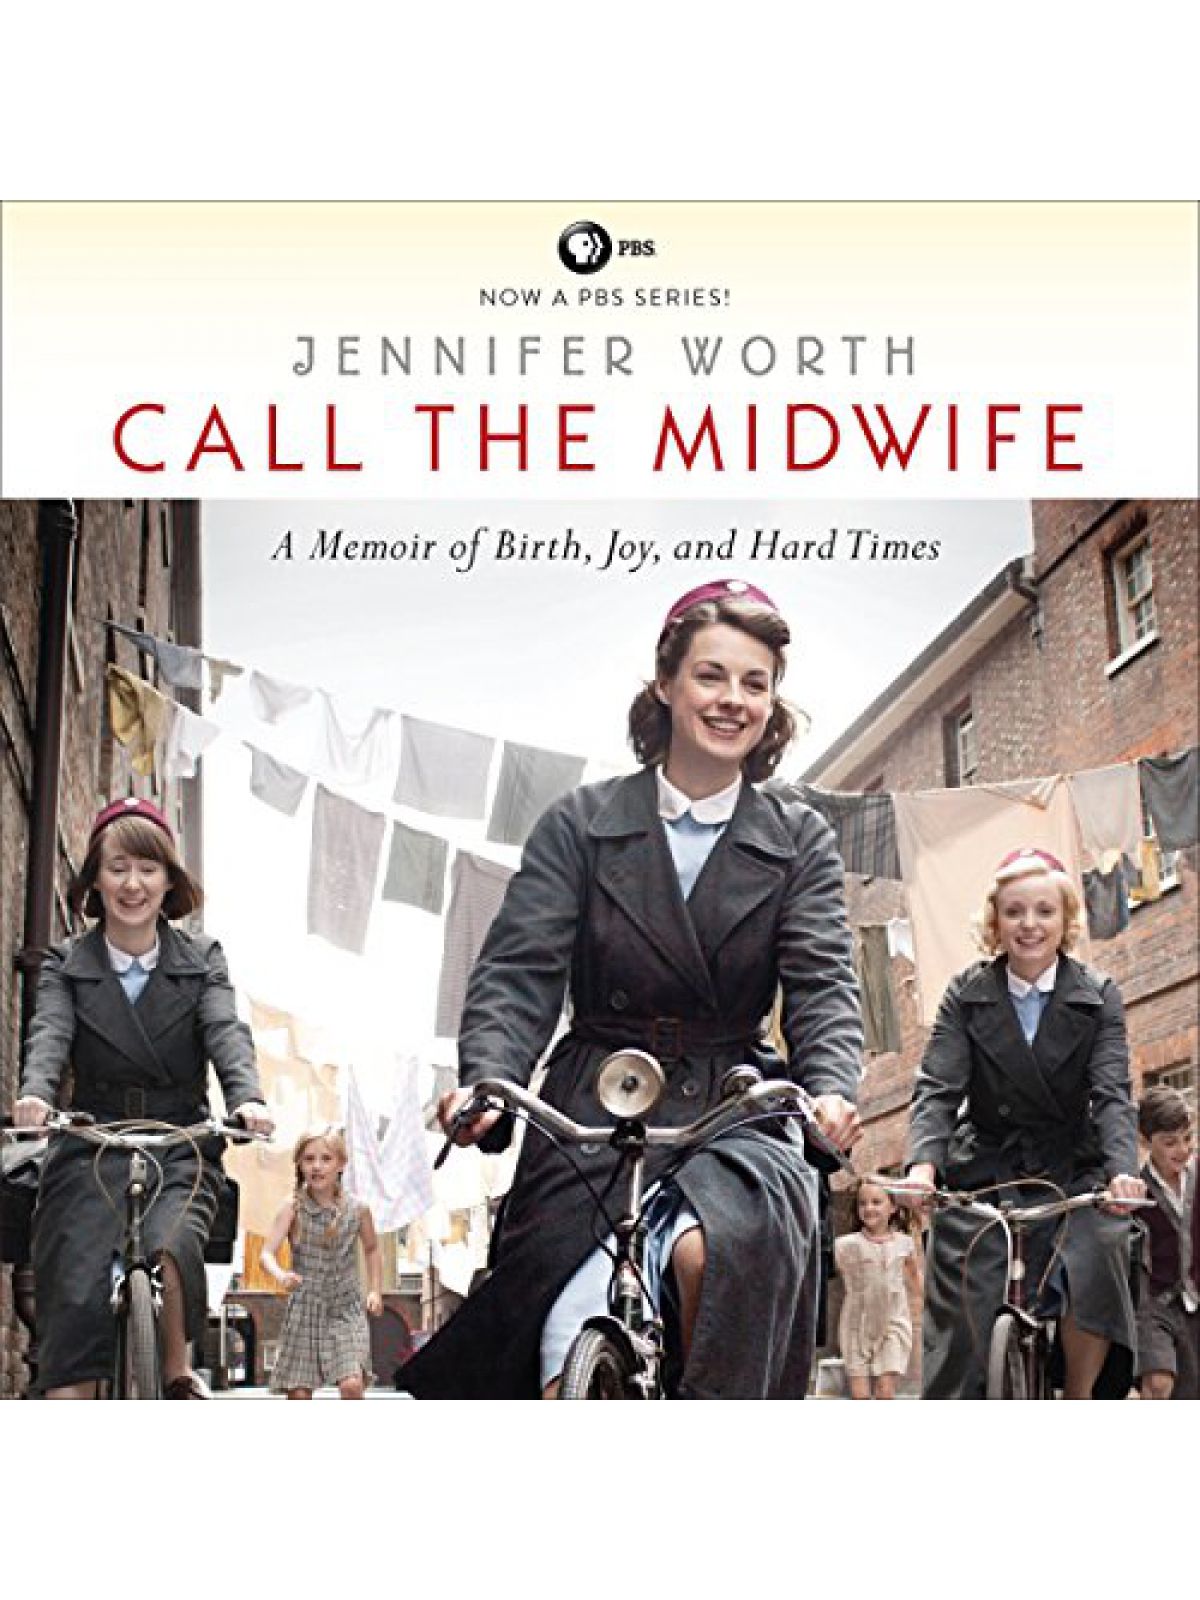 CALL THE MIDWIFE: A TRUE STORY OF THE EAST END IN THE 1950S  Купить Книгу на Английском